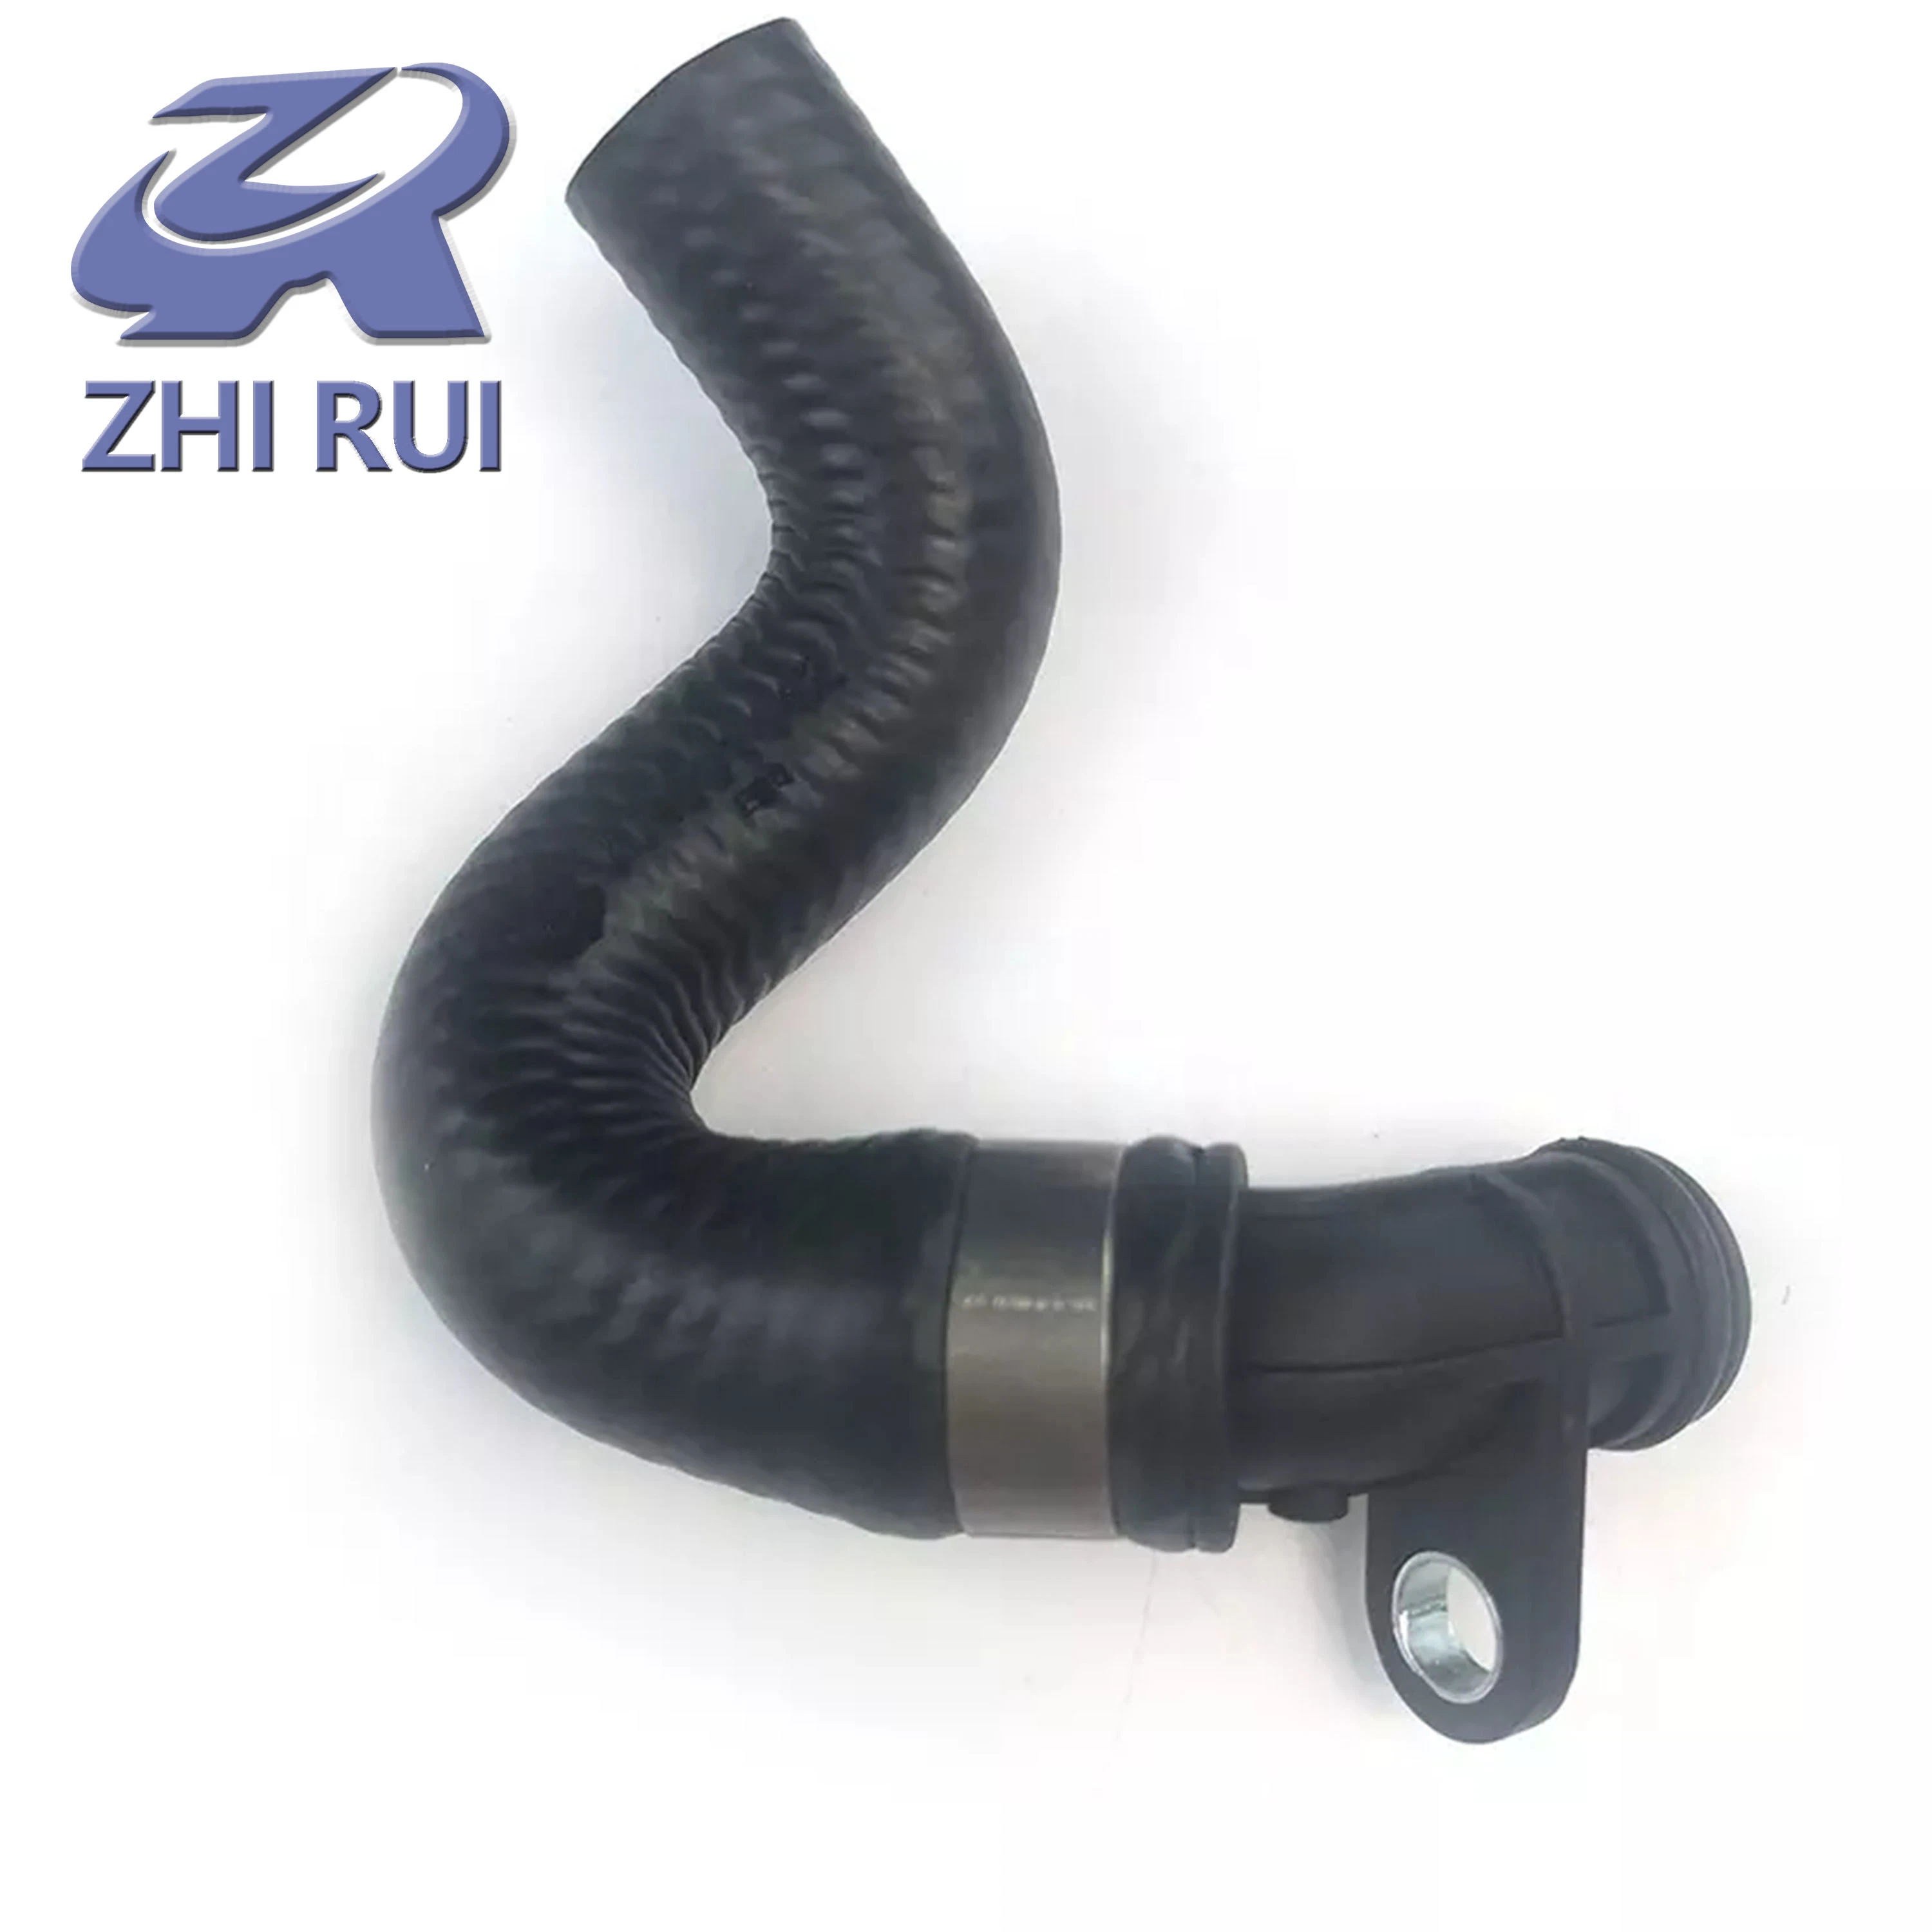 Auto Engine Radiator Coolant Hose Structure Cooling System Water Pipe for Auto Parts 3.2L 3.2L I6 Hse OEM Lr001442